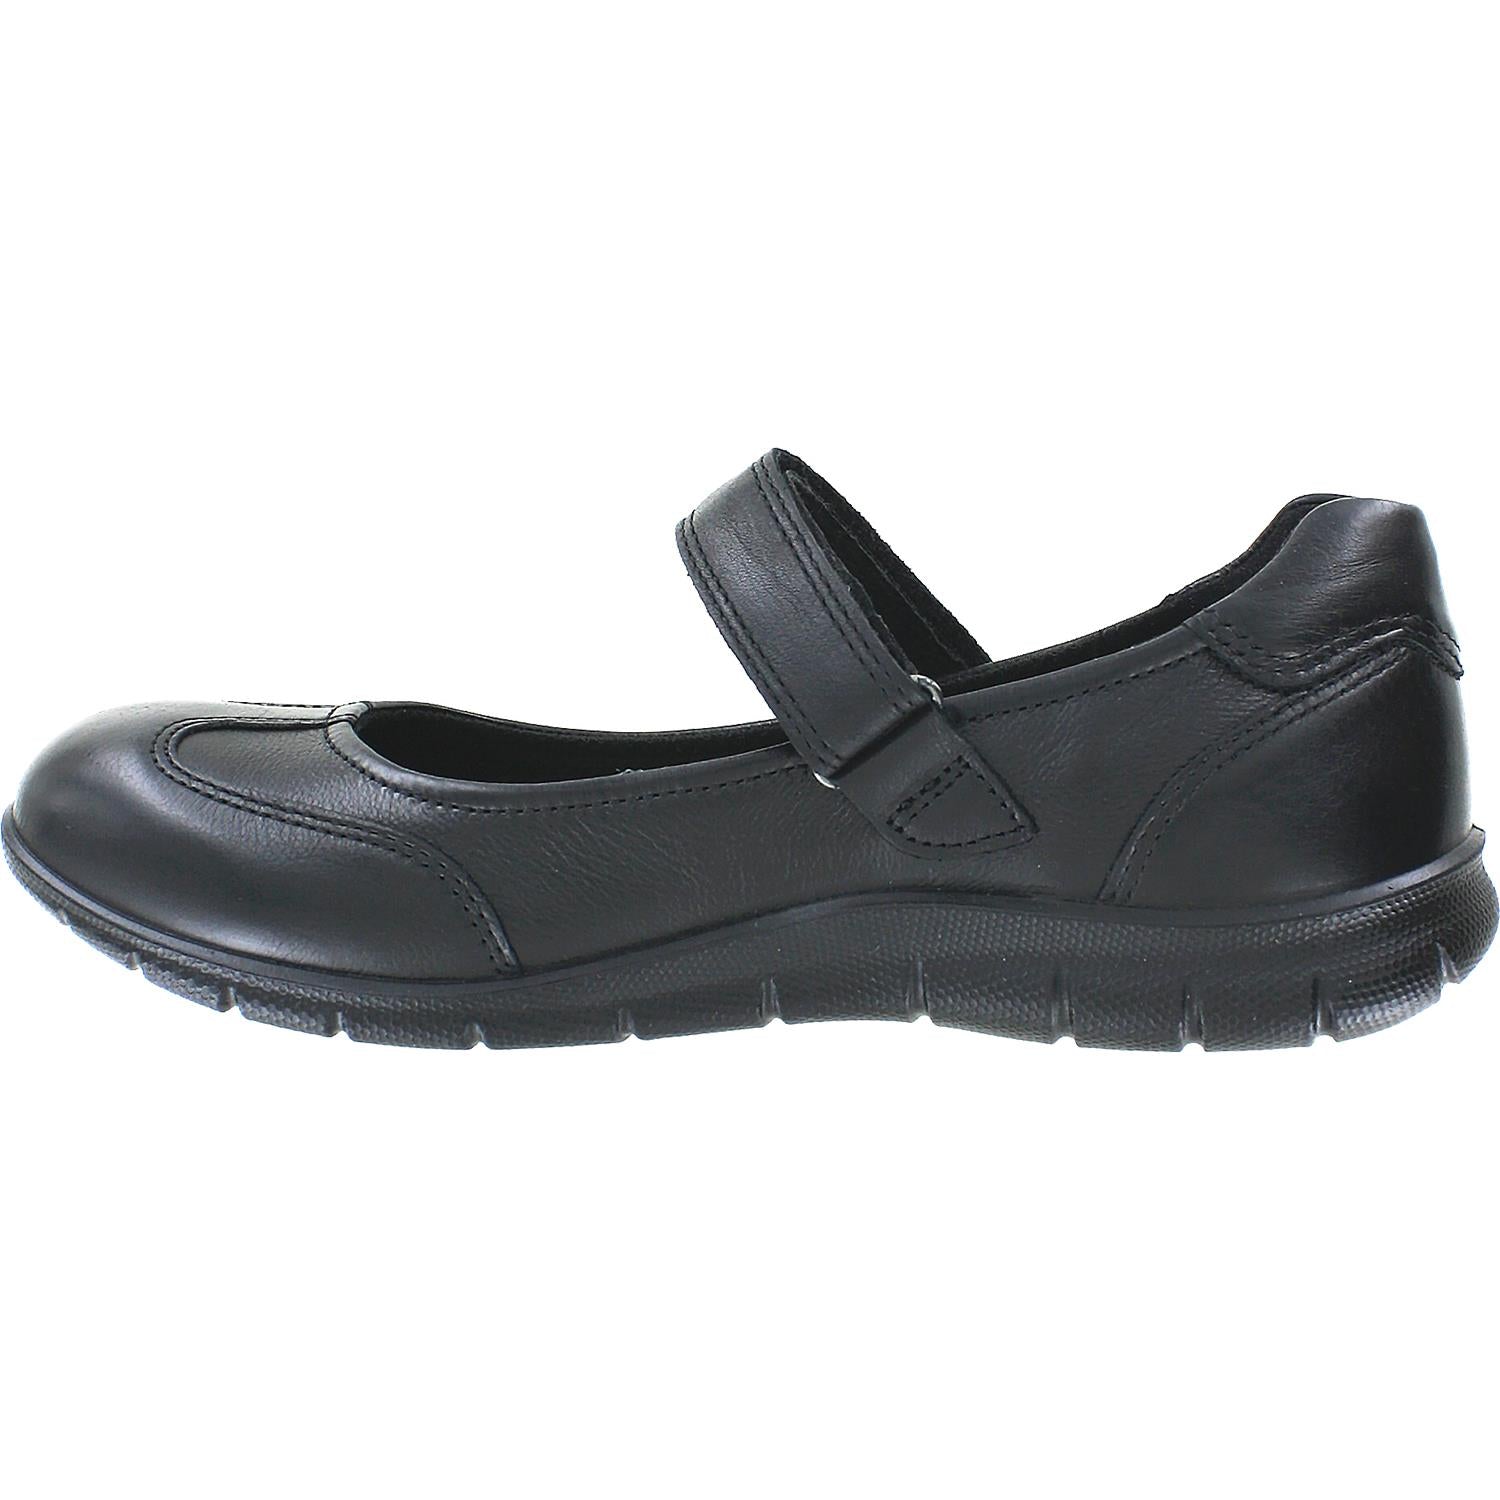 Ecco Mary Jane comfort shoes nNew with out box inglesefe.com